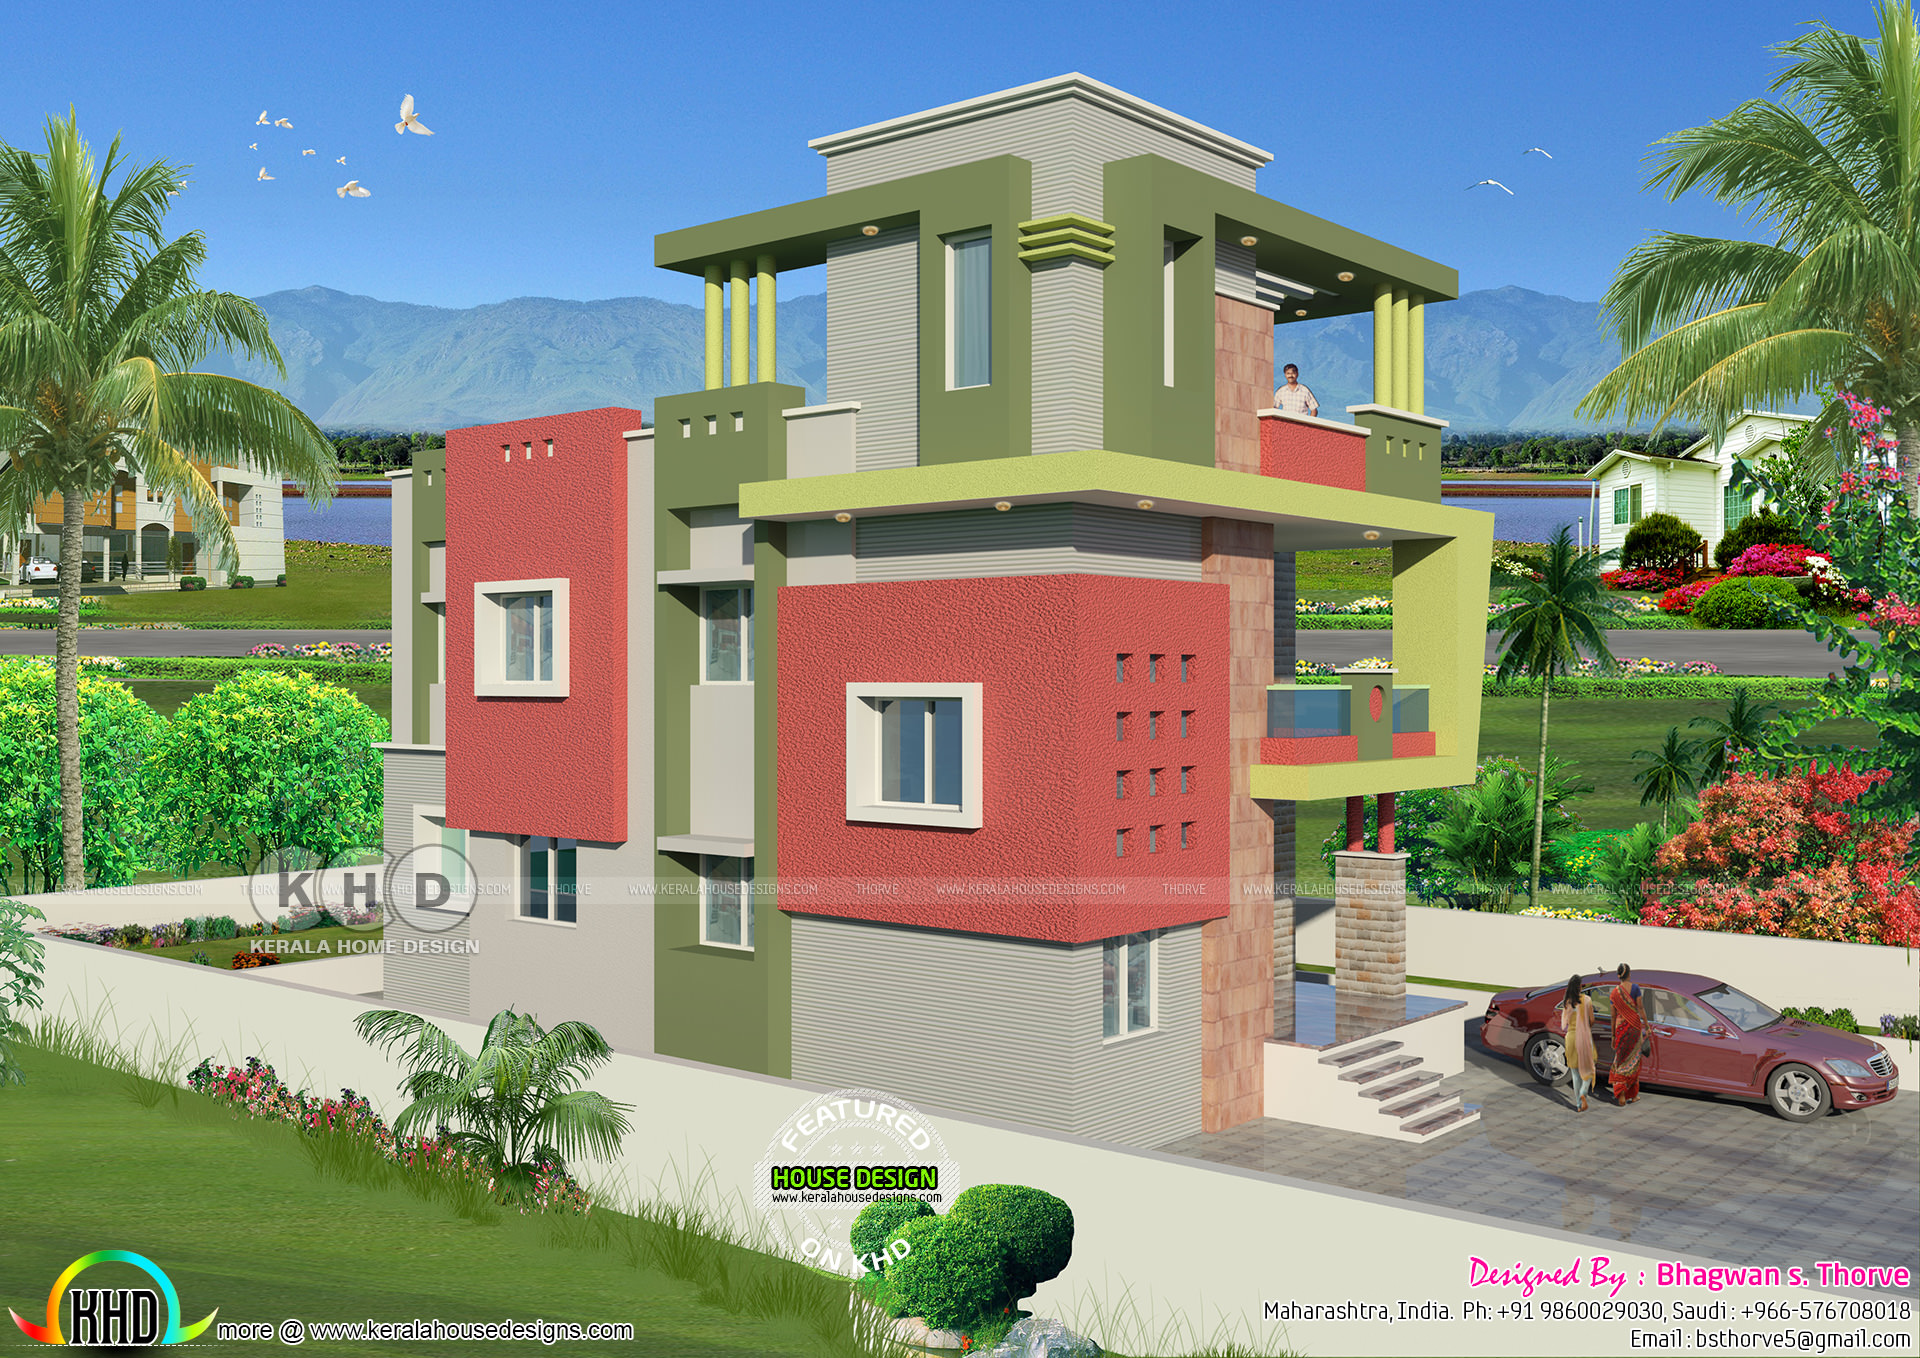  North  Indian  Duplex house  plan  Kerala home  design and 